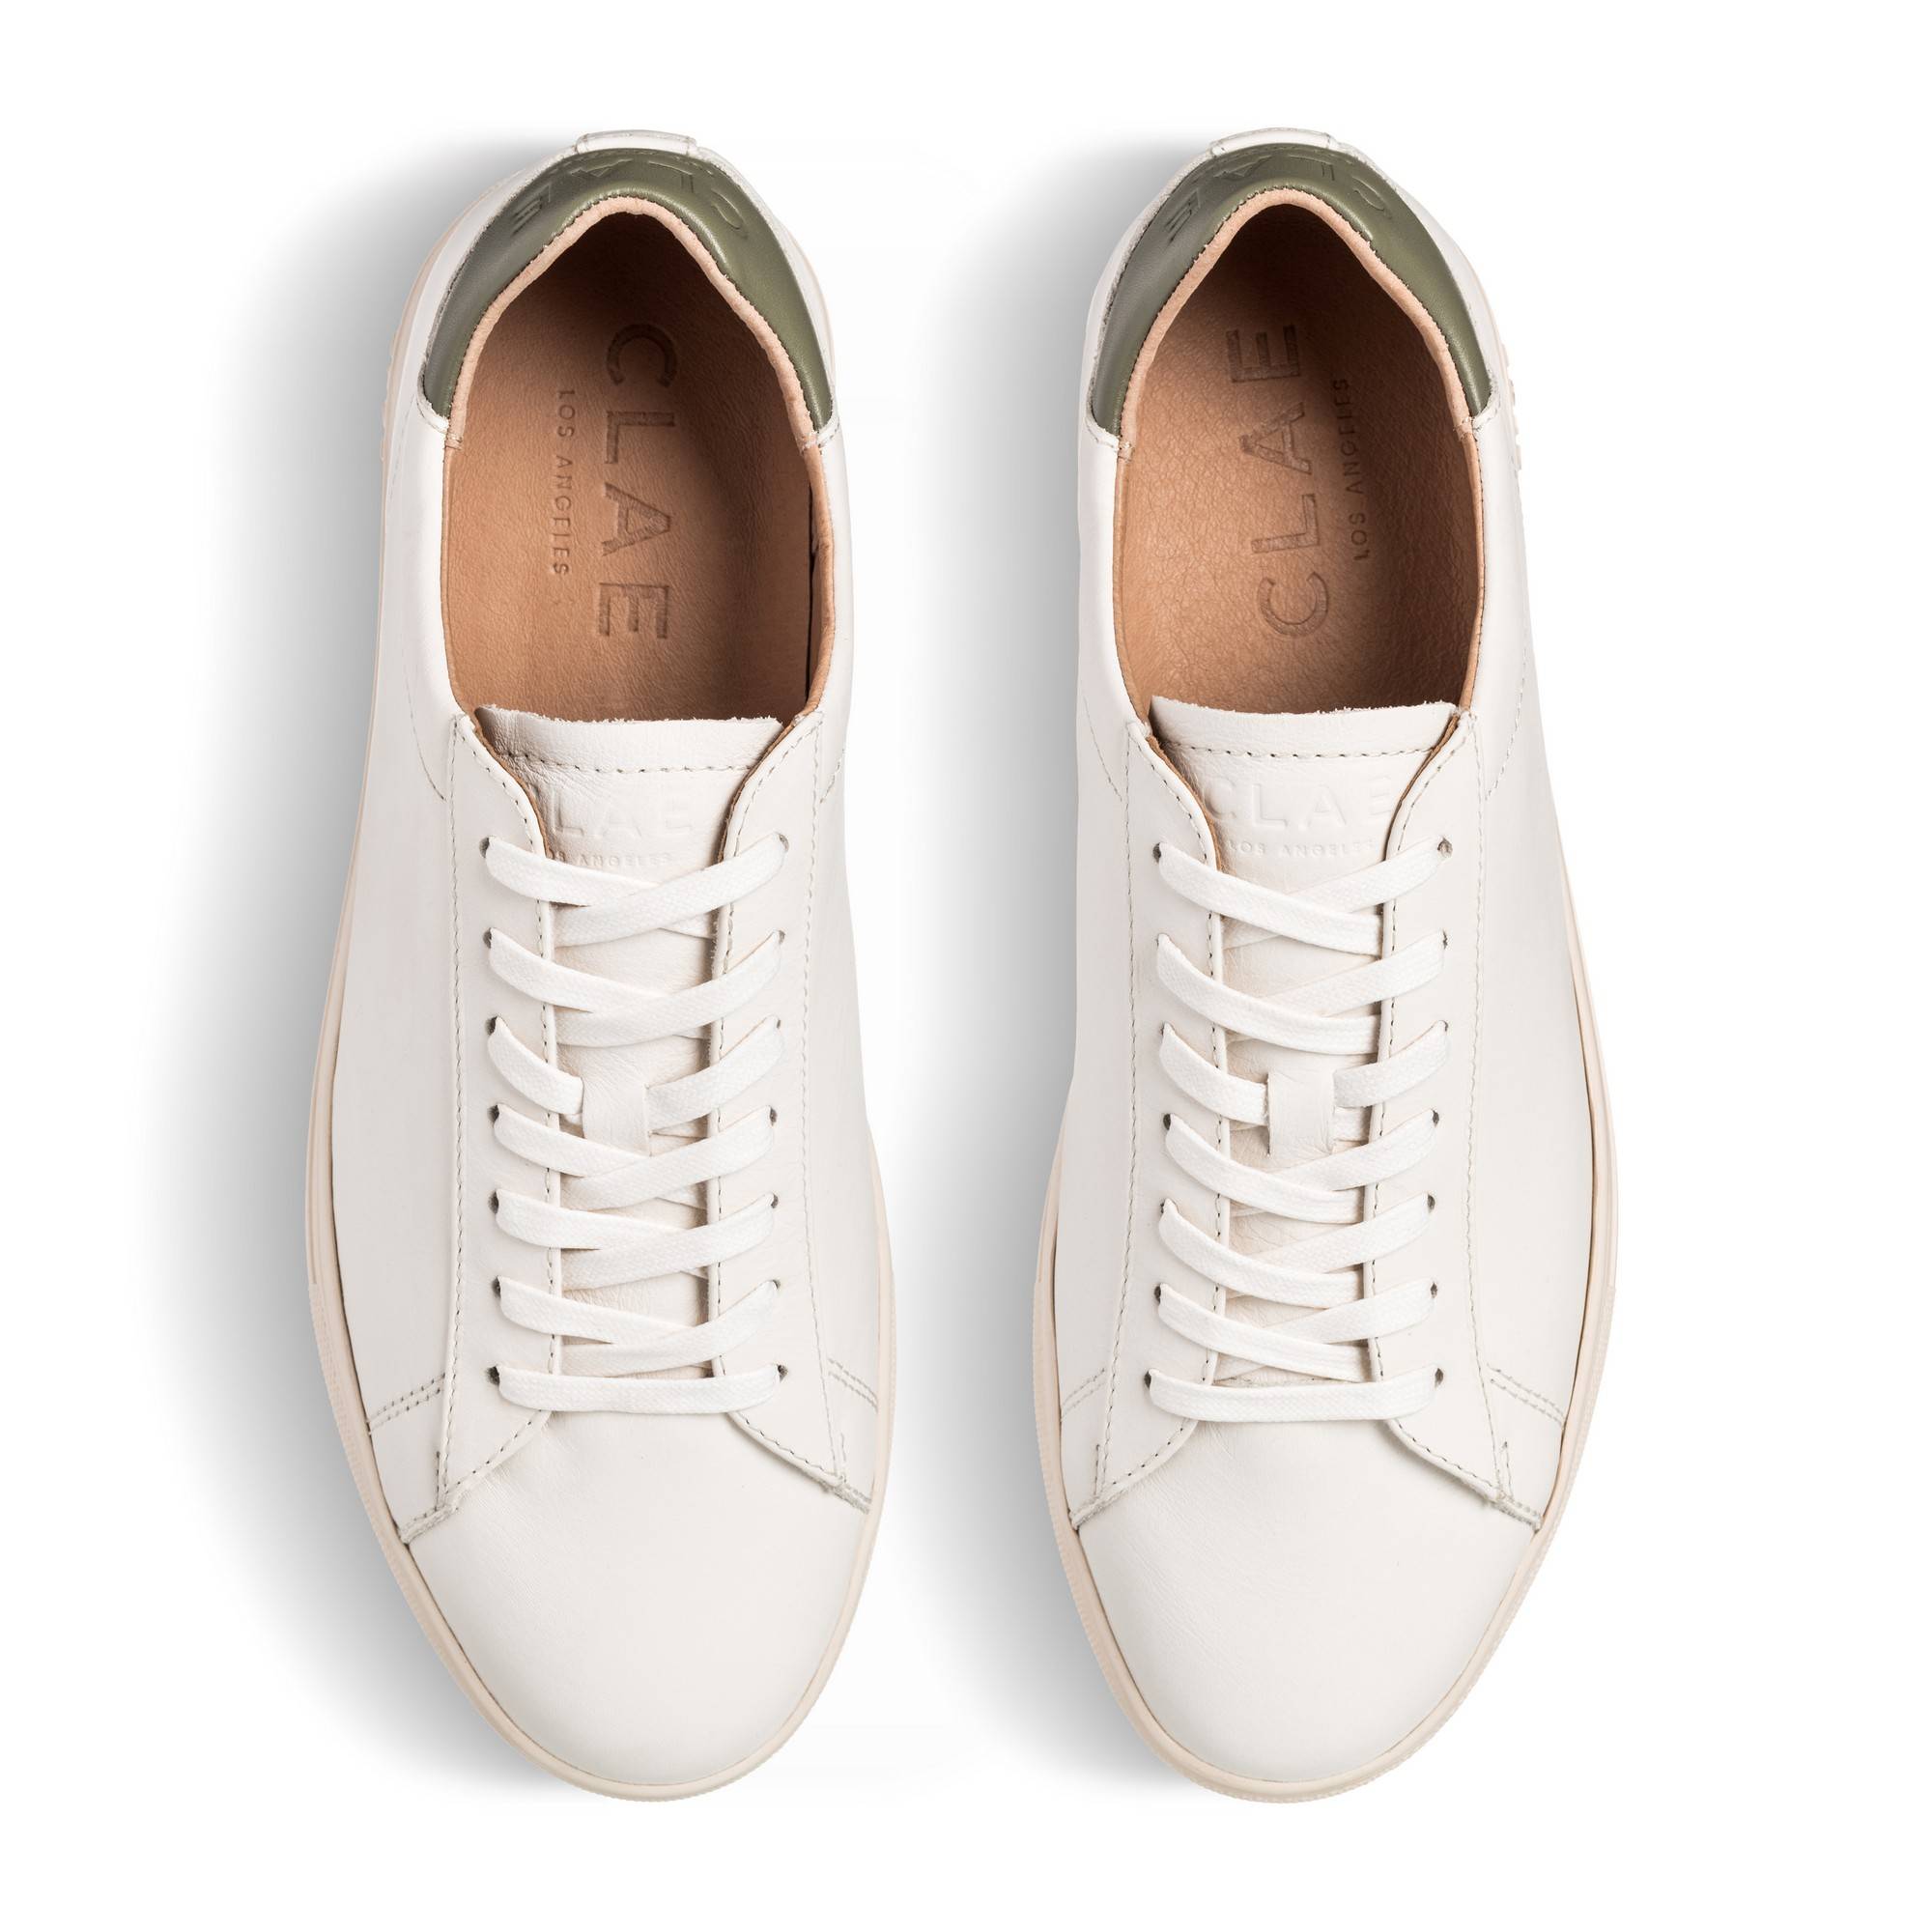 Off-White Collection – CLAE